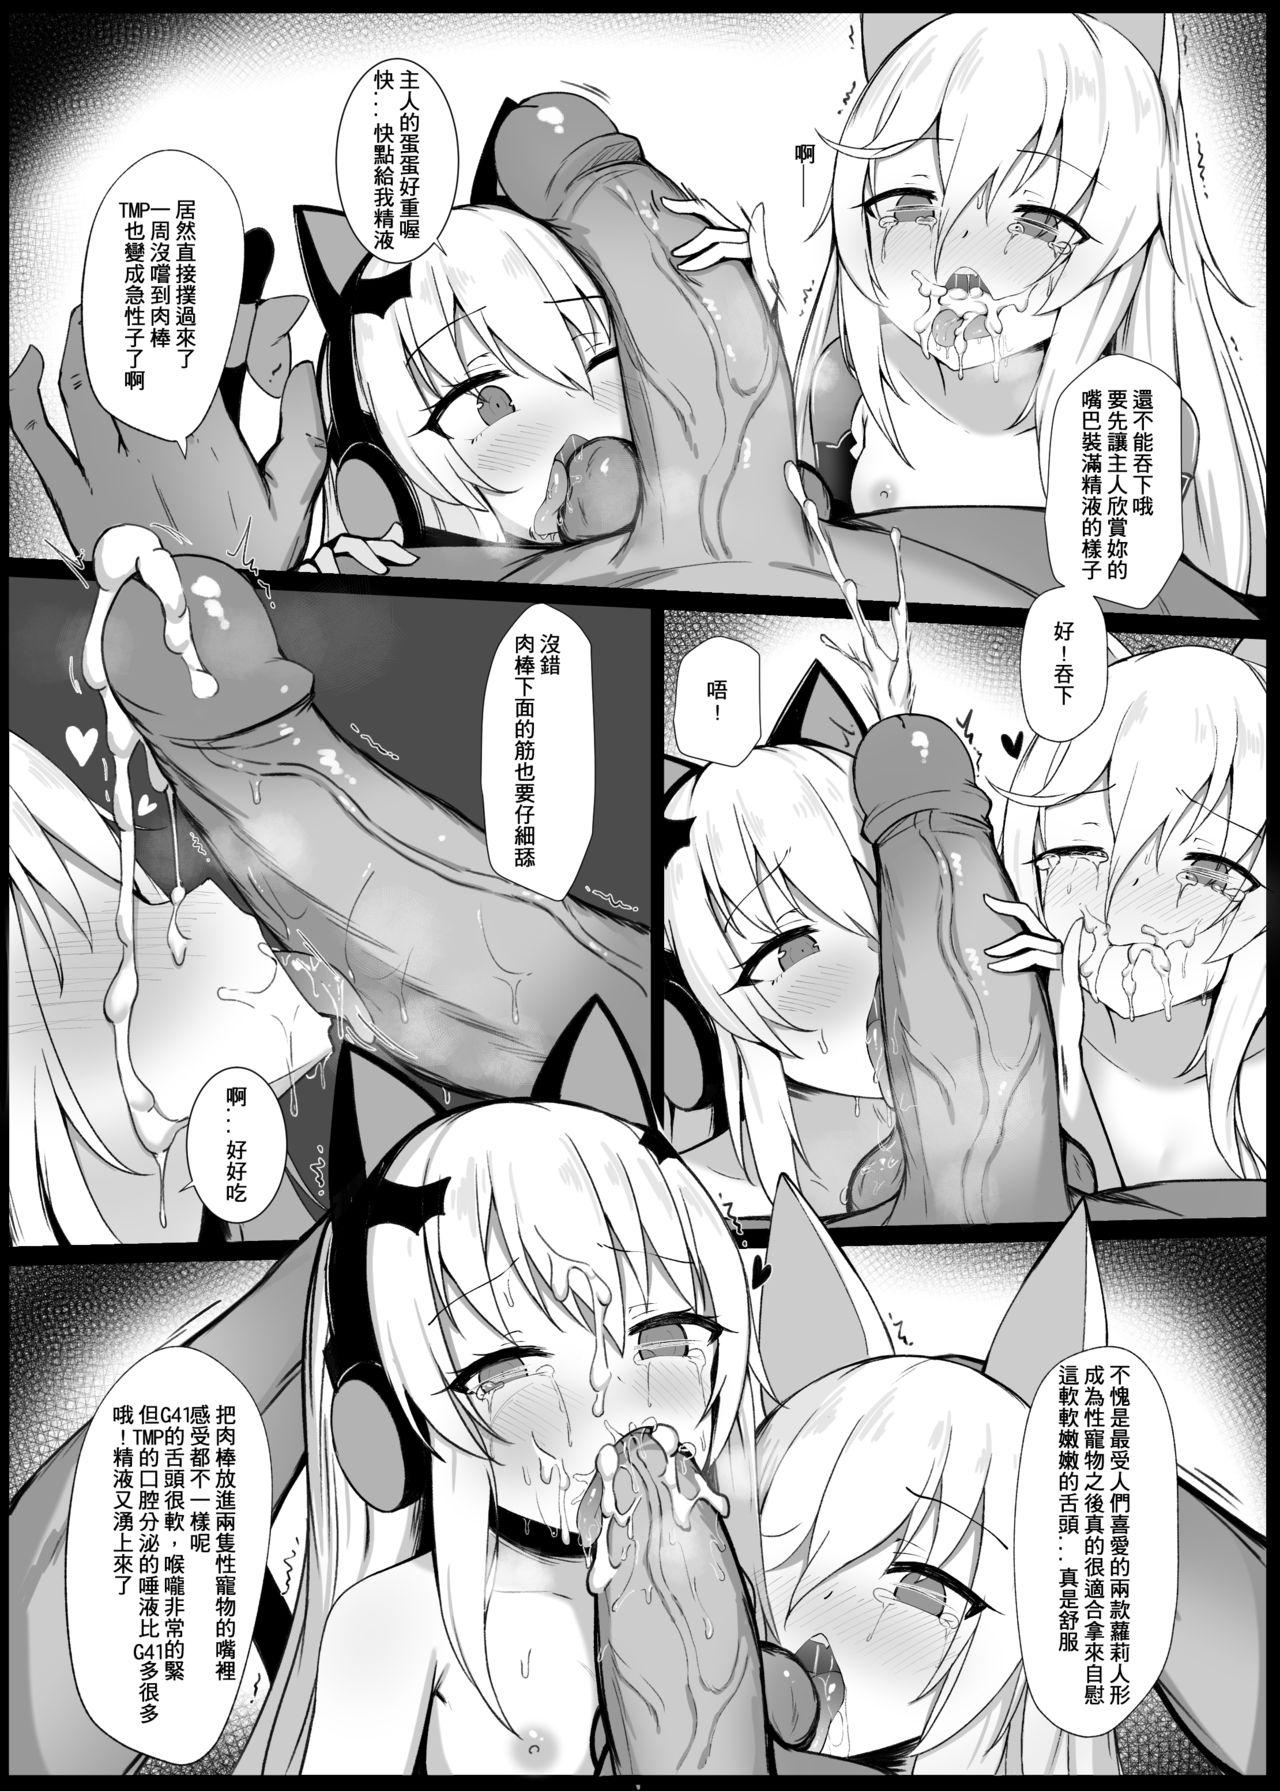 Ghetto Commander's Pet - Girls frontline Shemales - Page 8